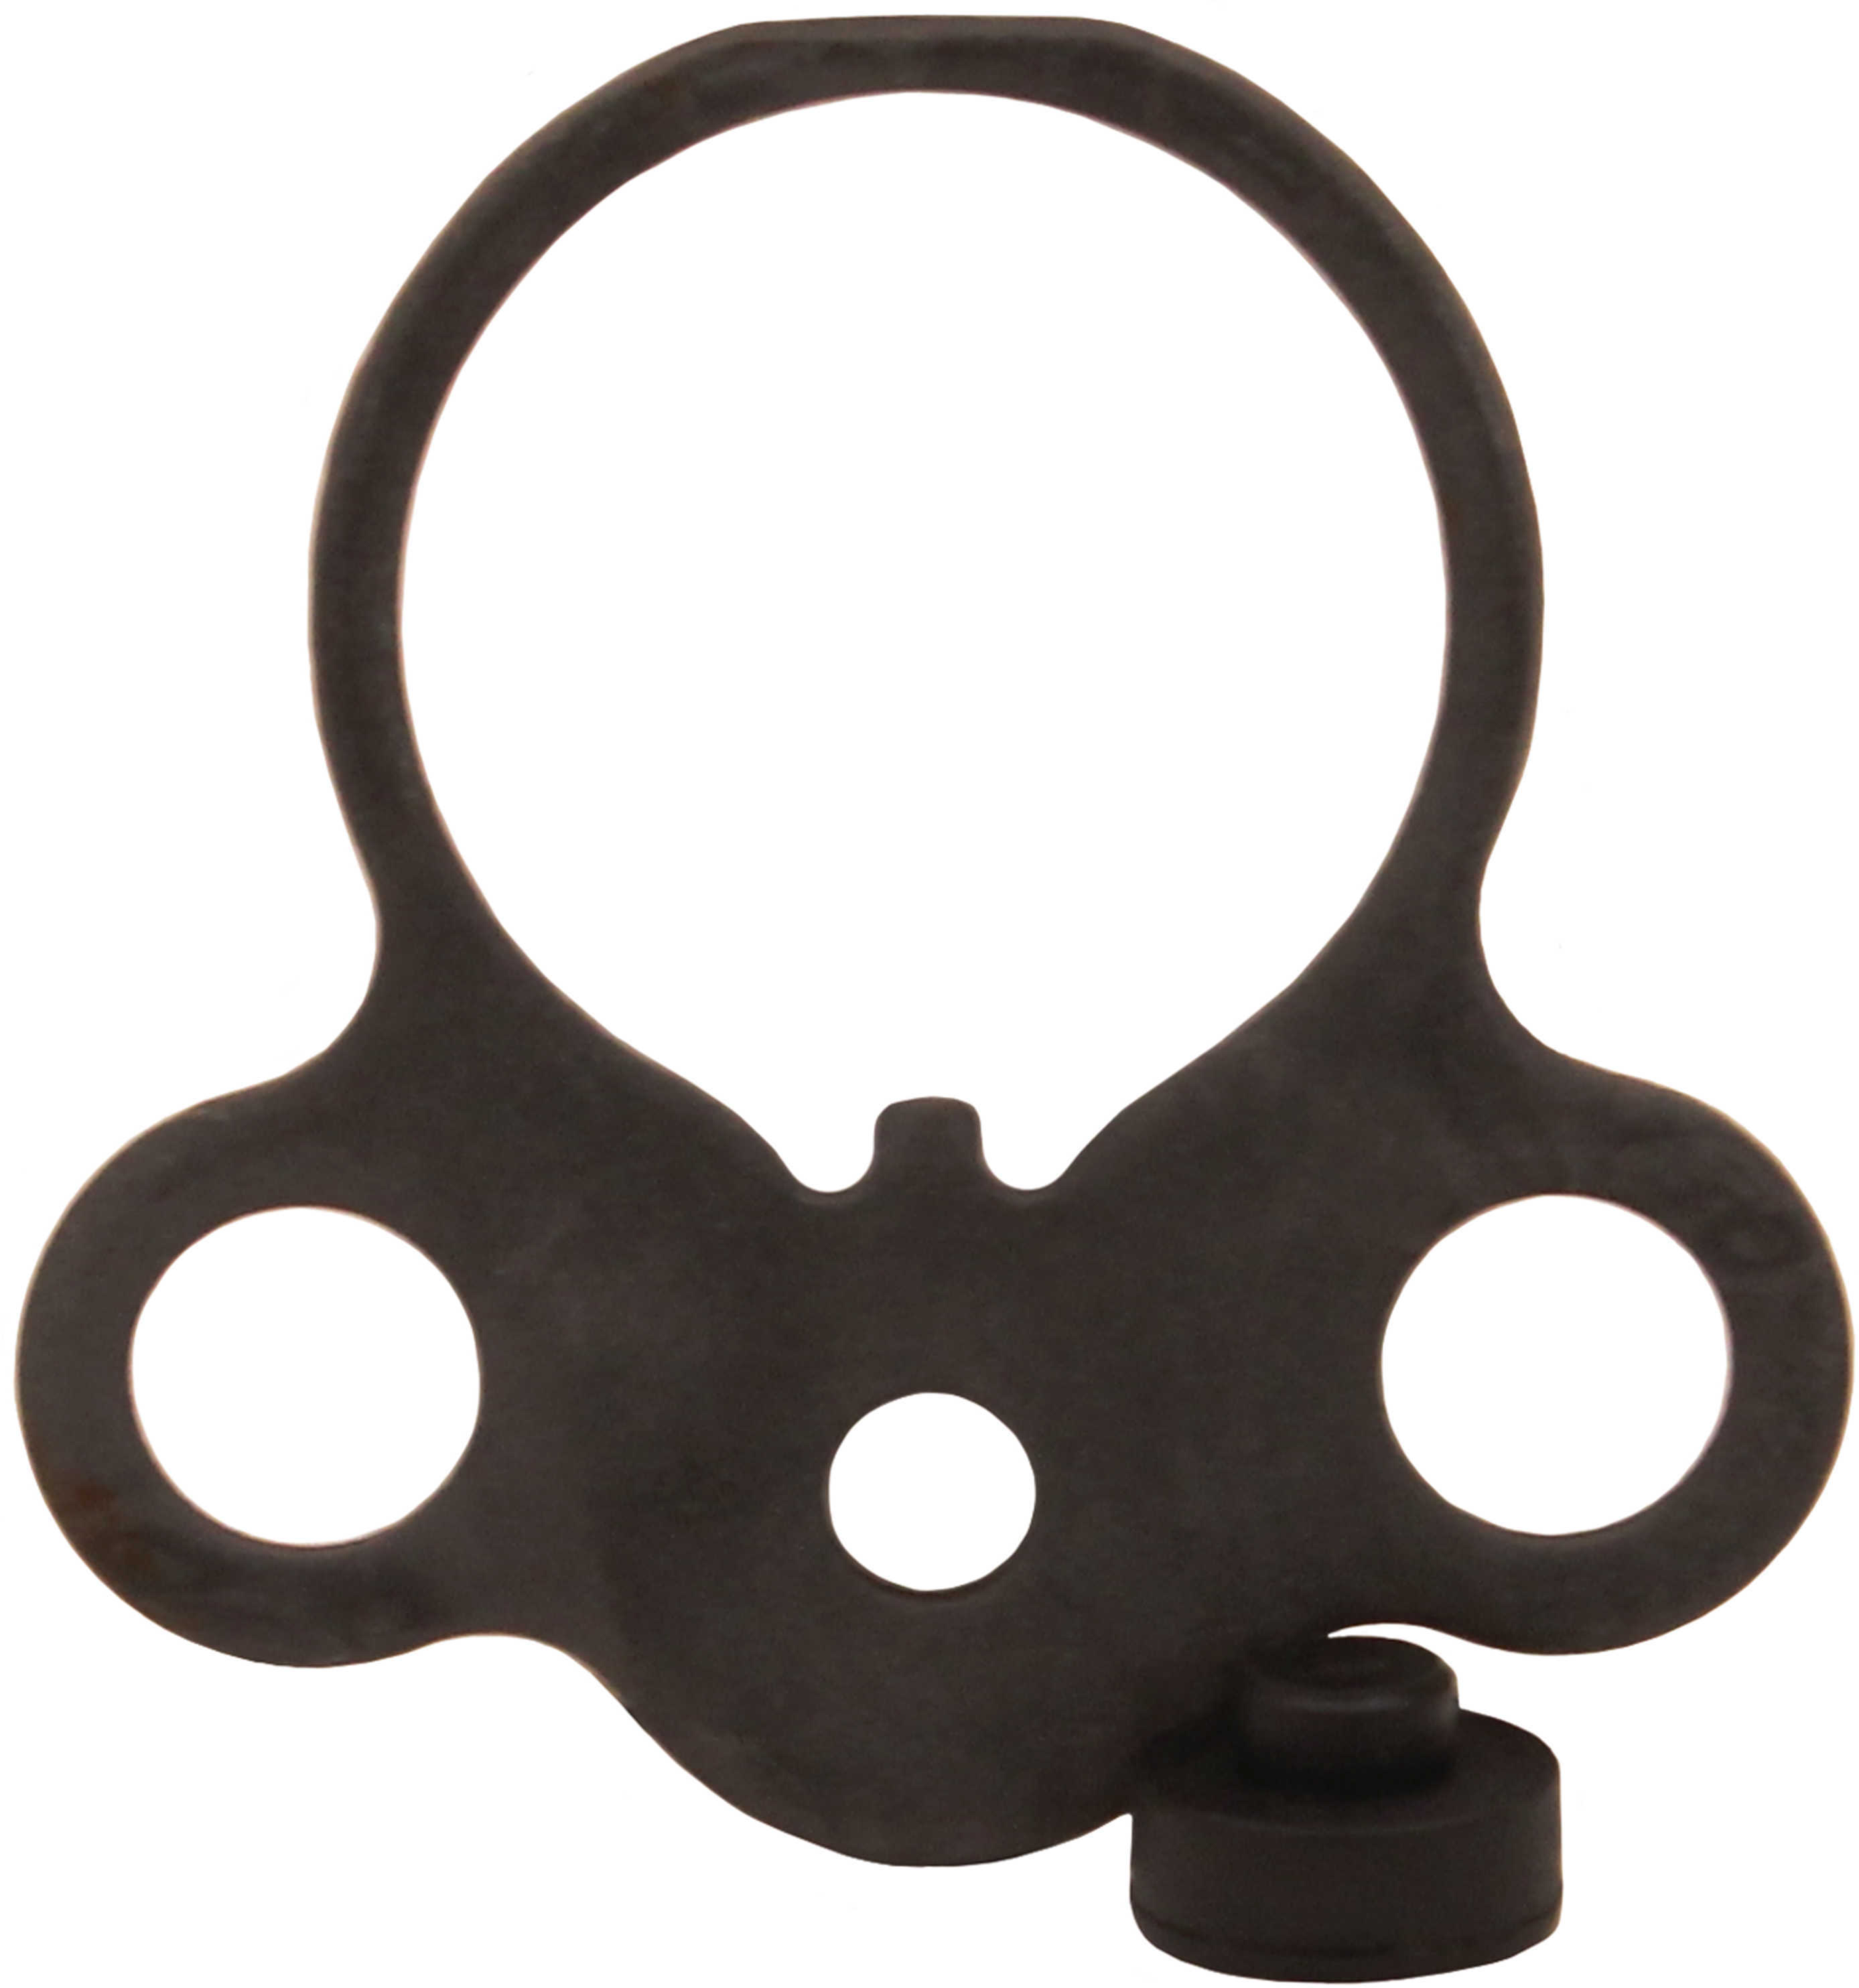 Promag Sling Dual Point Attach Plate AMBID AR-15